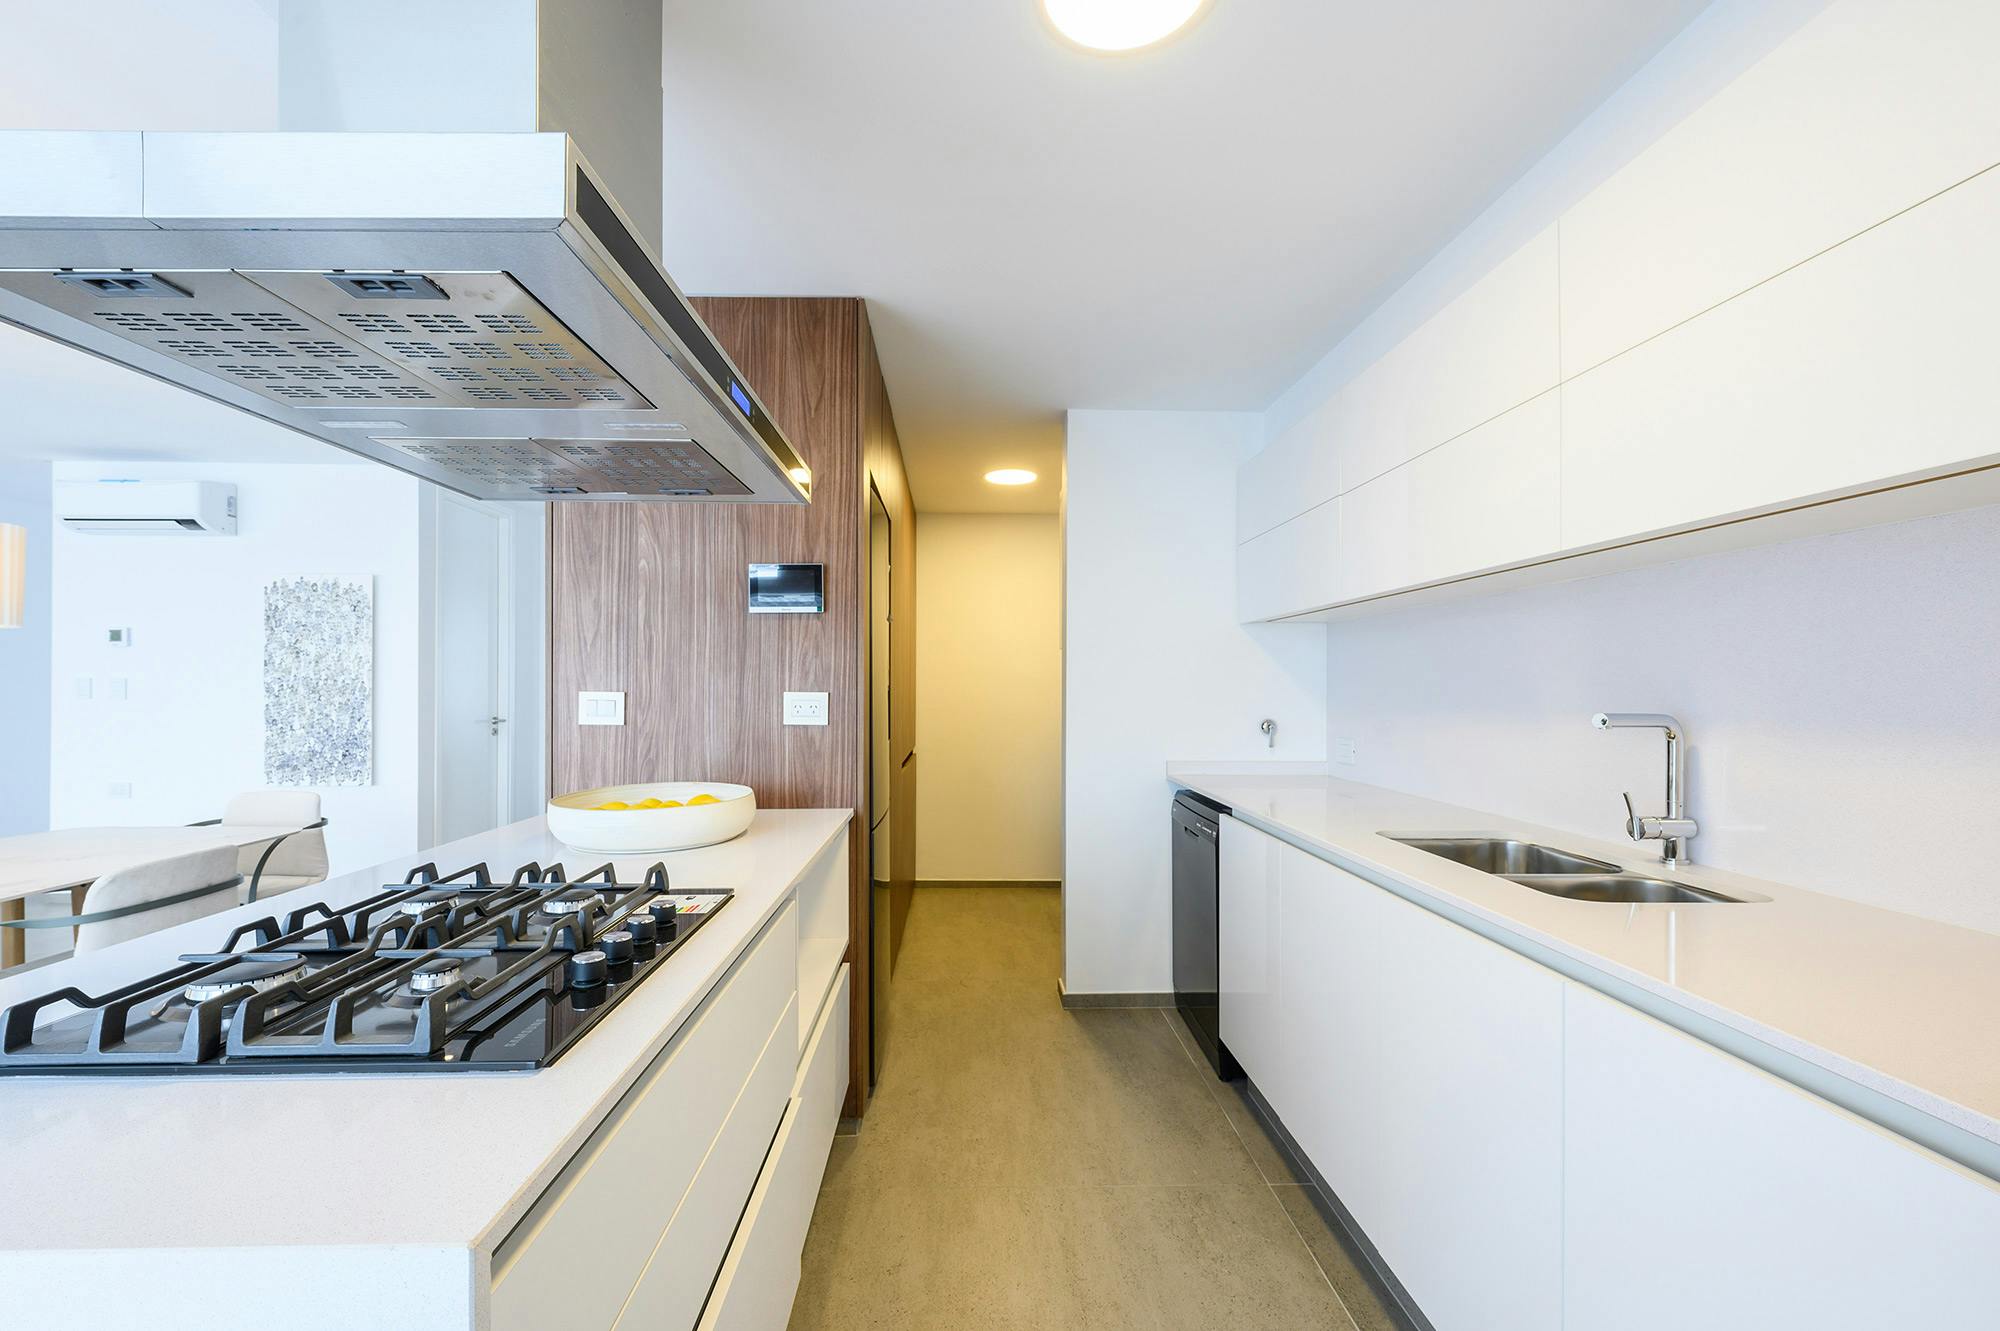 Numéro d'image 36 de la section actuelle de DKTN Sirius adds a welcoming touch to the kitchens of a residential development in Dubai de Cosentino France